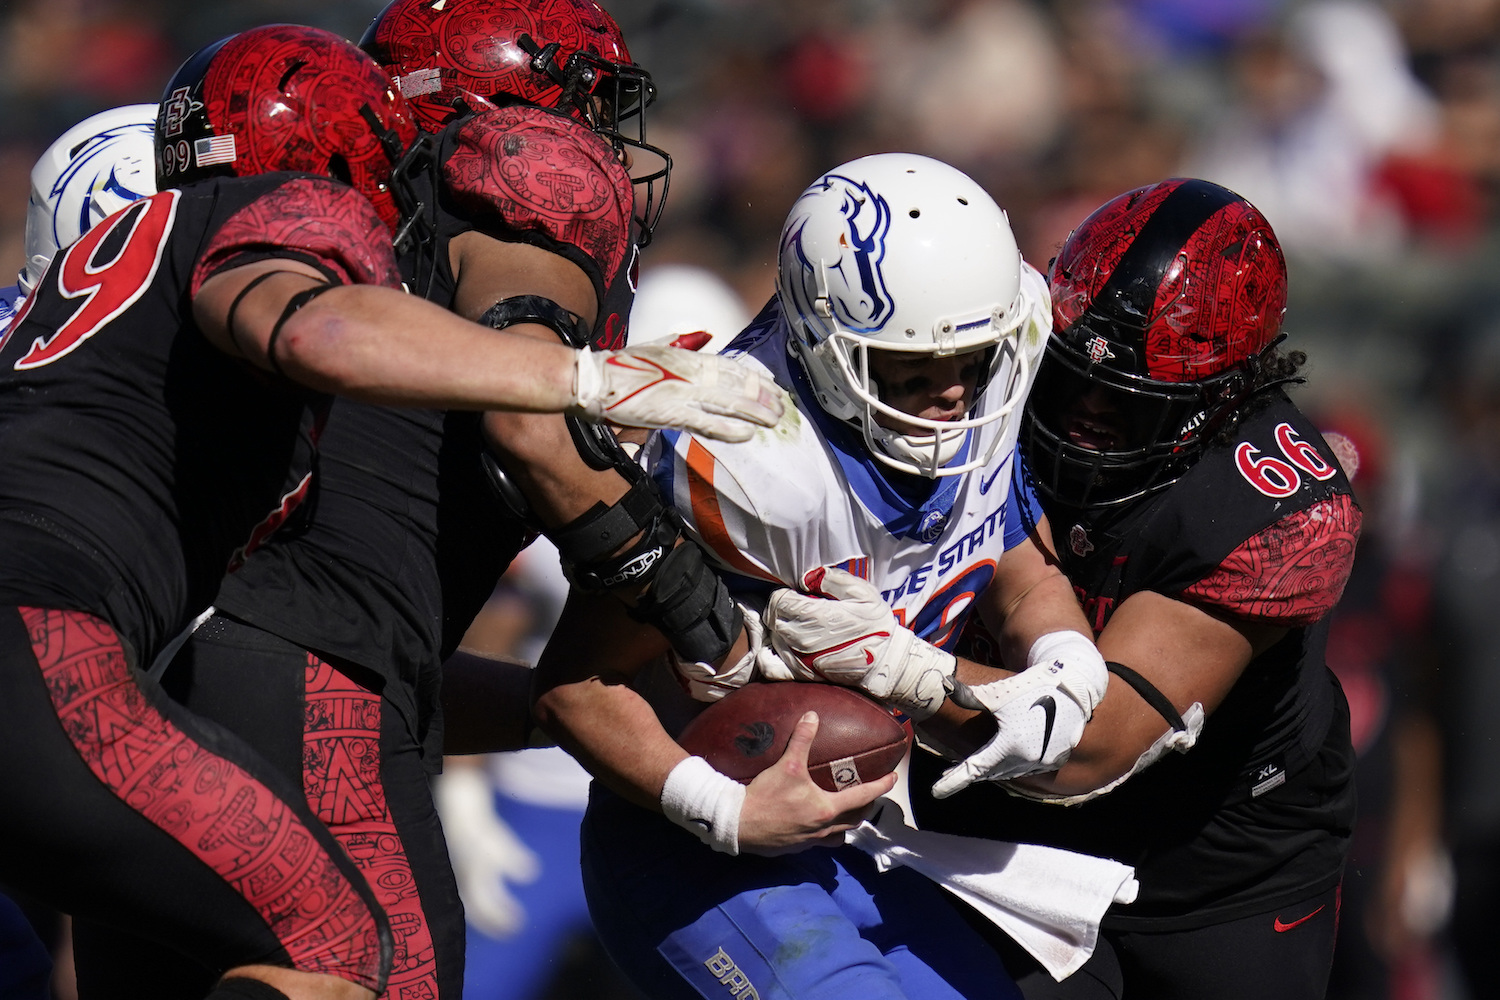 Mountain West power rankings: Boise State stays at No. 4 after